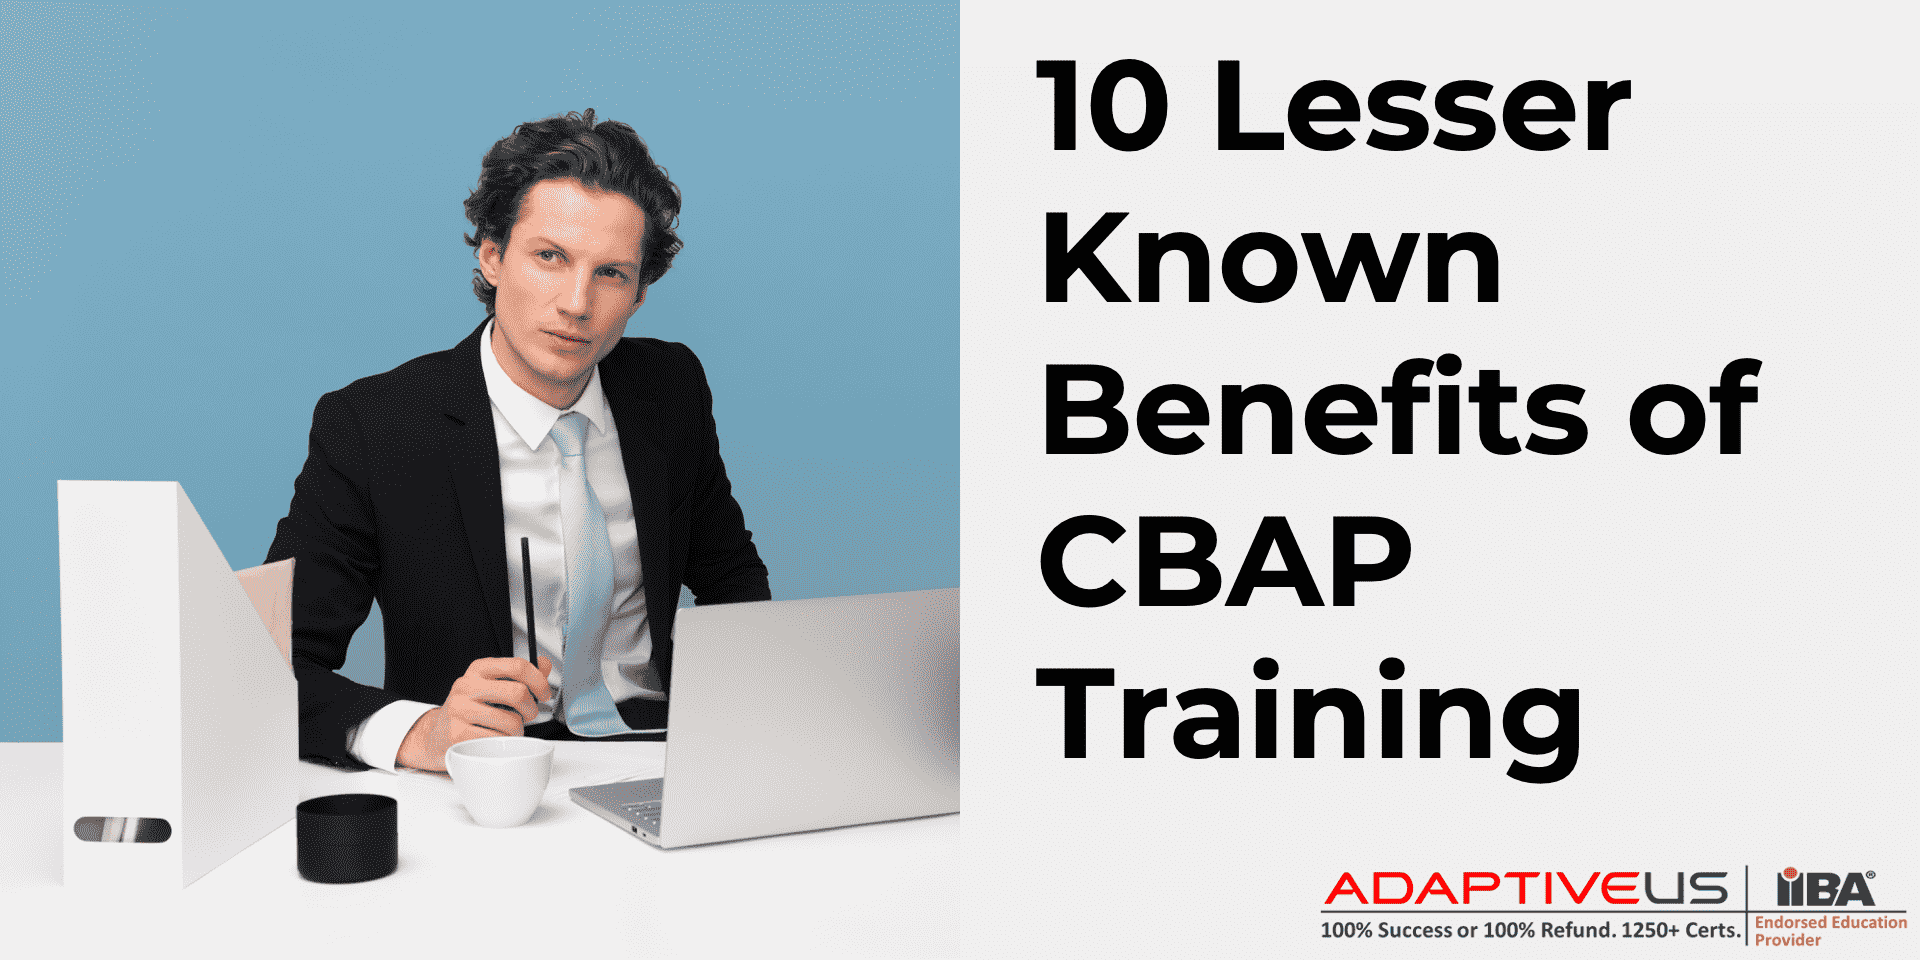 10 Lesser-Known Benefits of CBAP Training